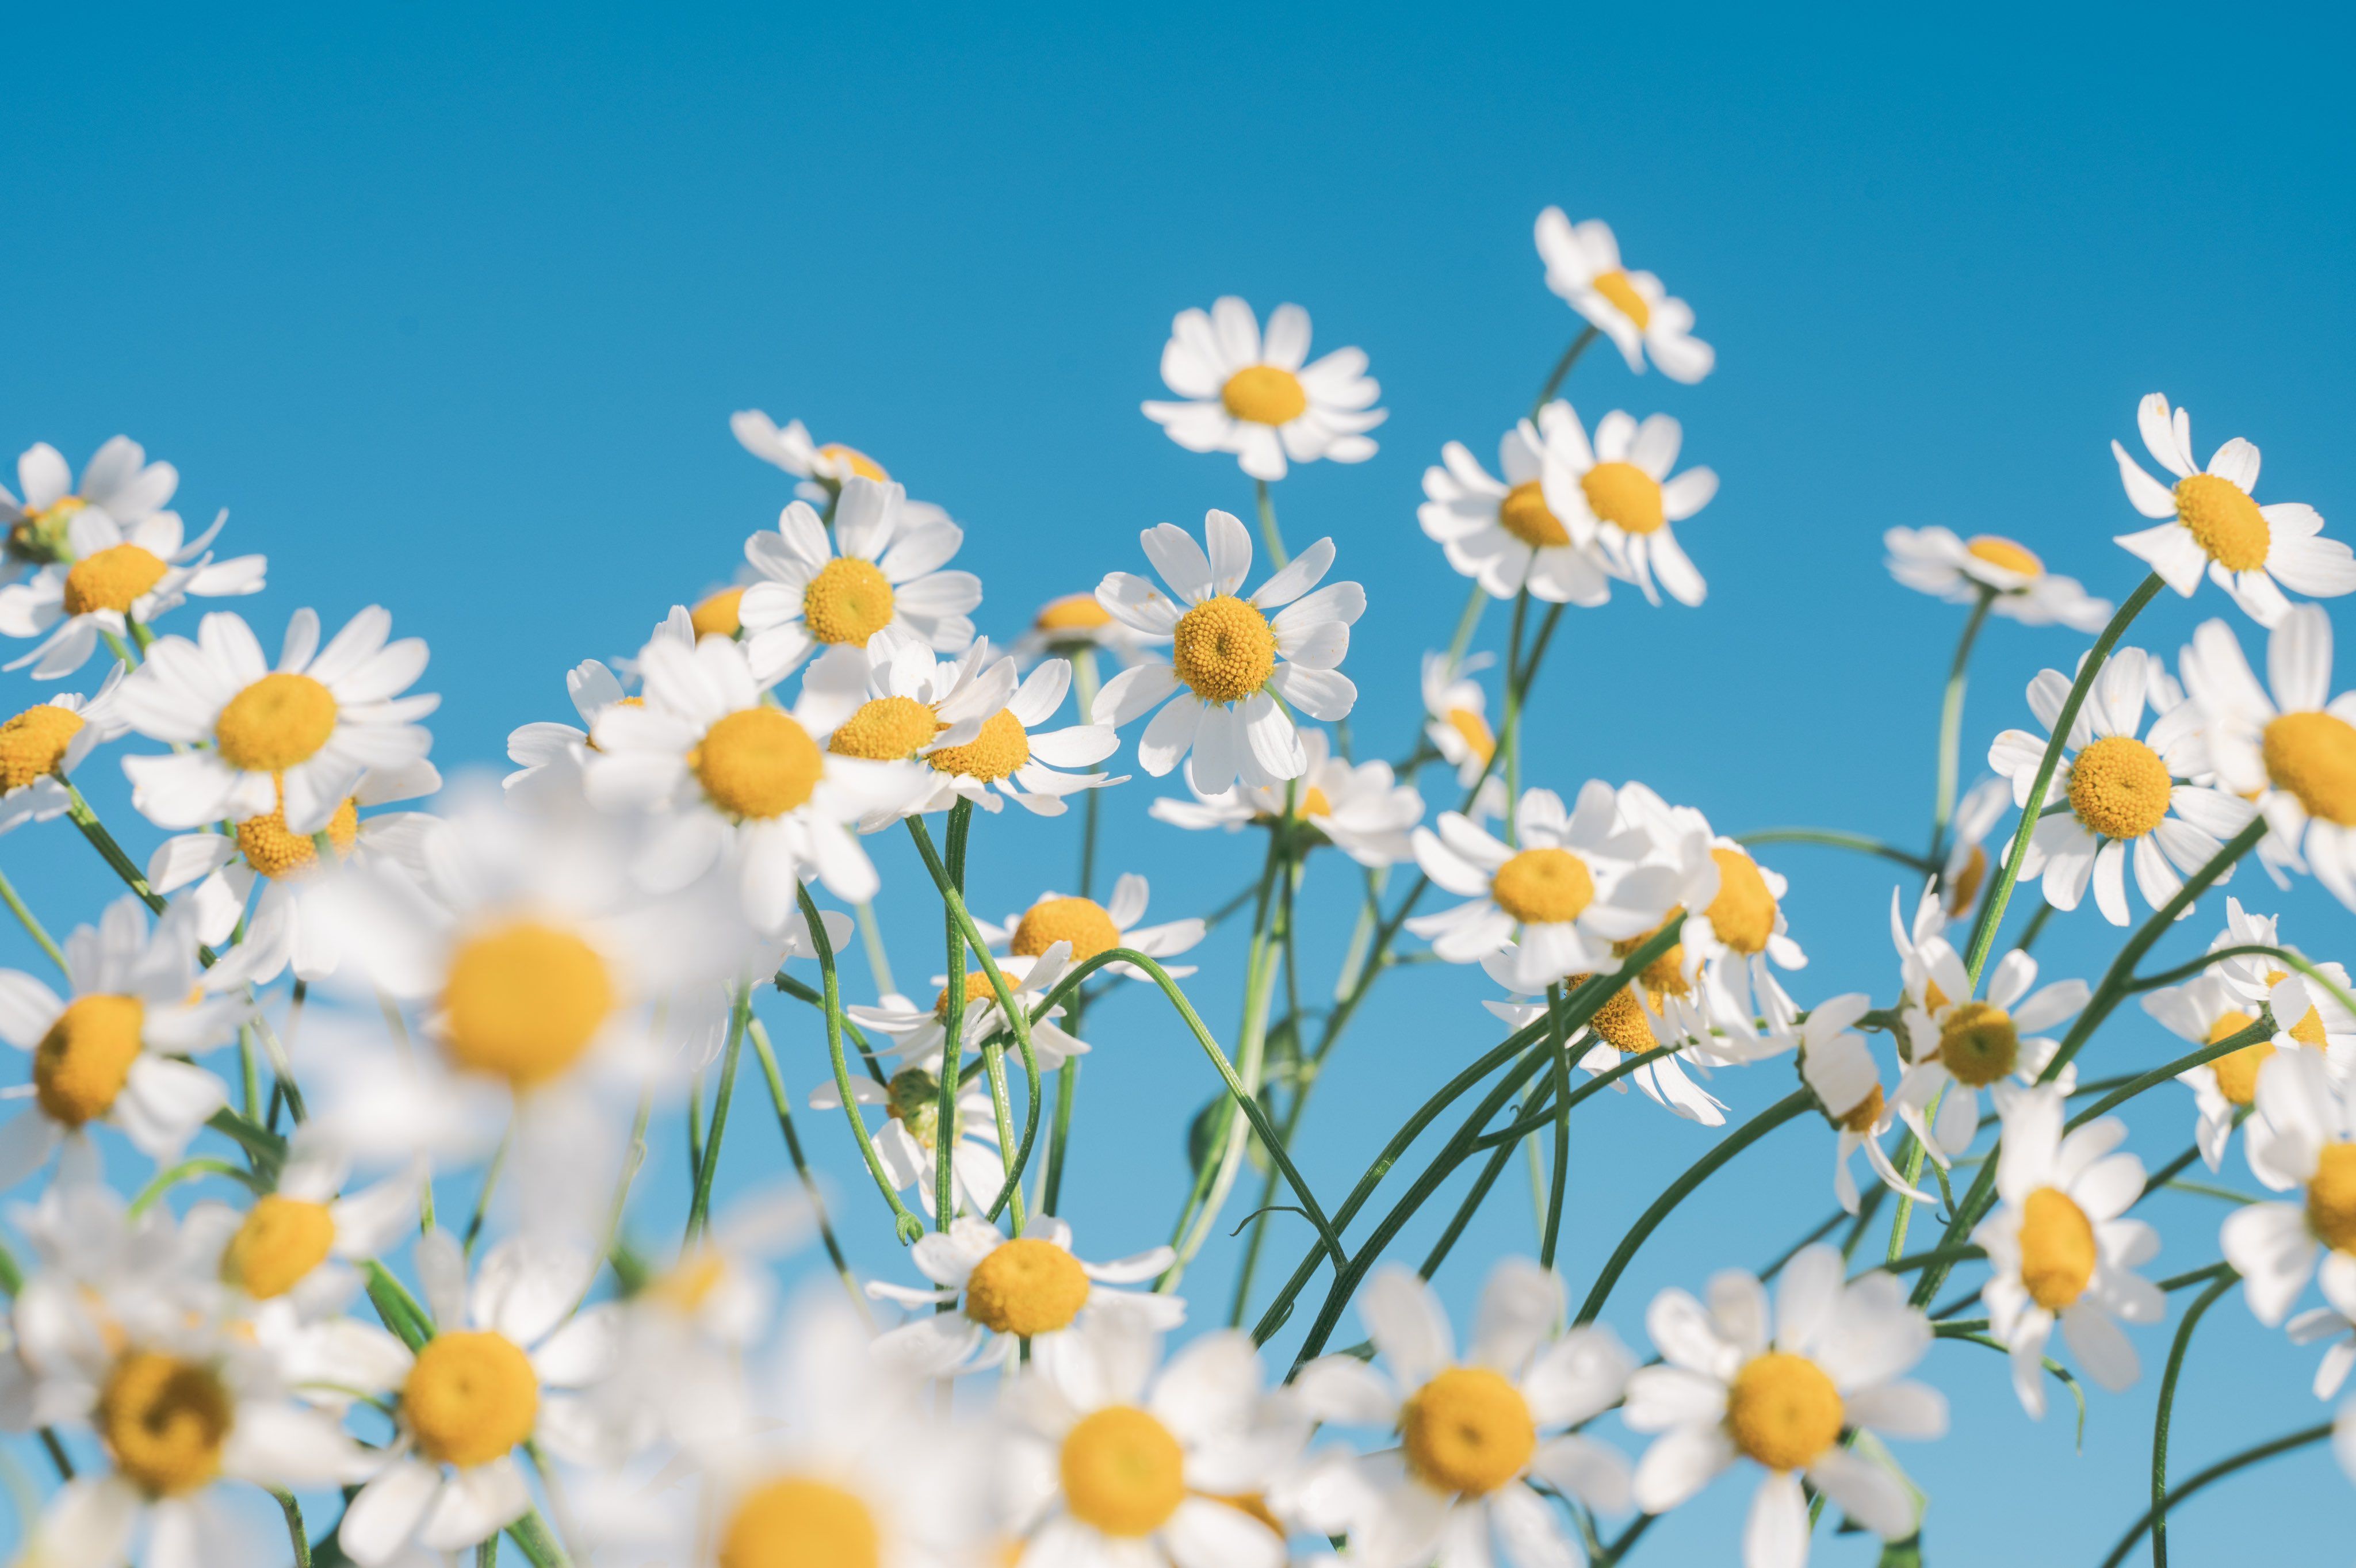 A field of white and yellow chamomile flowers against a blue sky - Spring